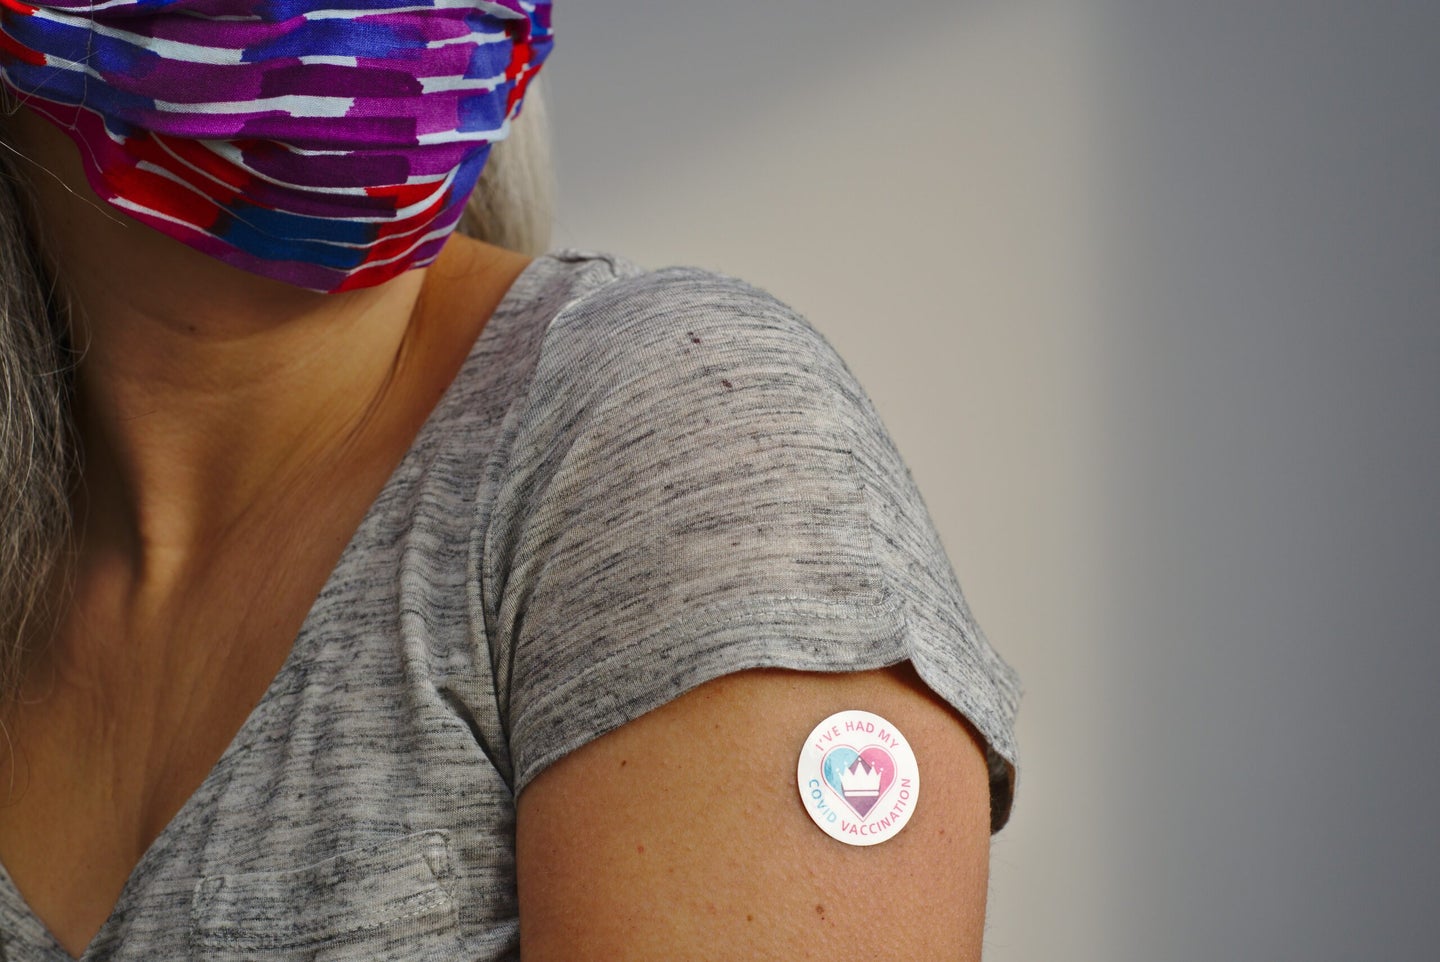 <a href="https://depositphotos.com/473053140/stock-photo-sticker-saying-had-covid-vaccination.html">Will booster shots be needed to protect us from current and future variants, and if so, when will they be necessary.</a>